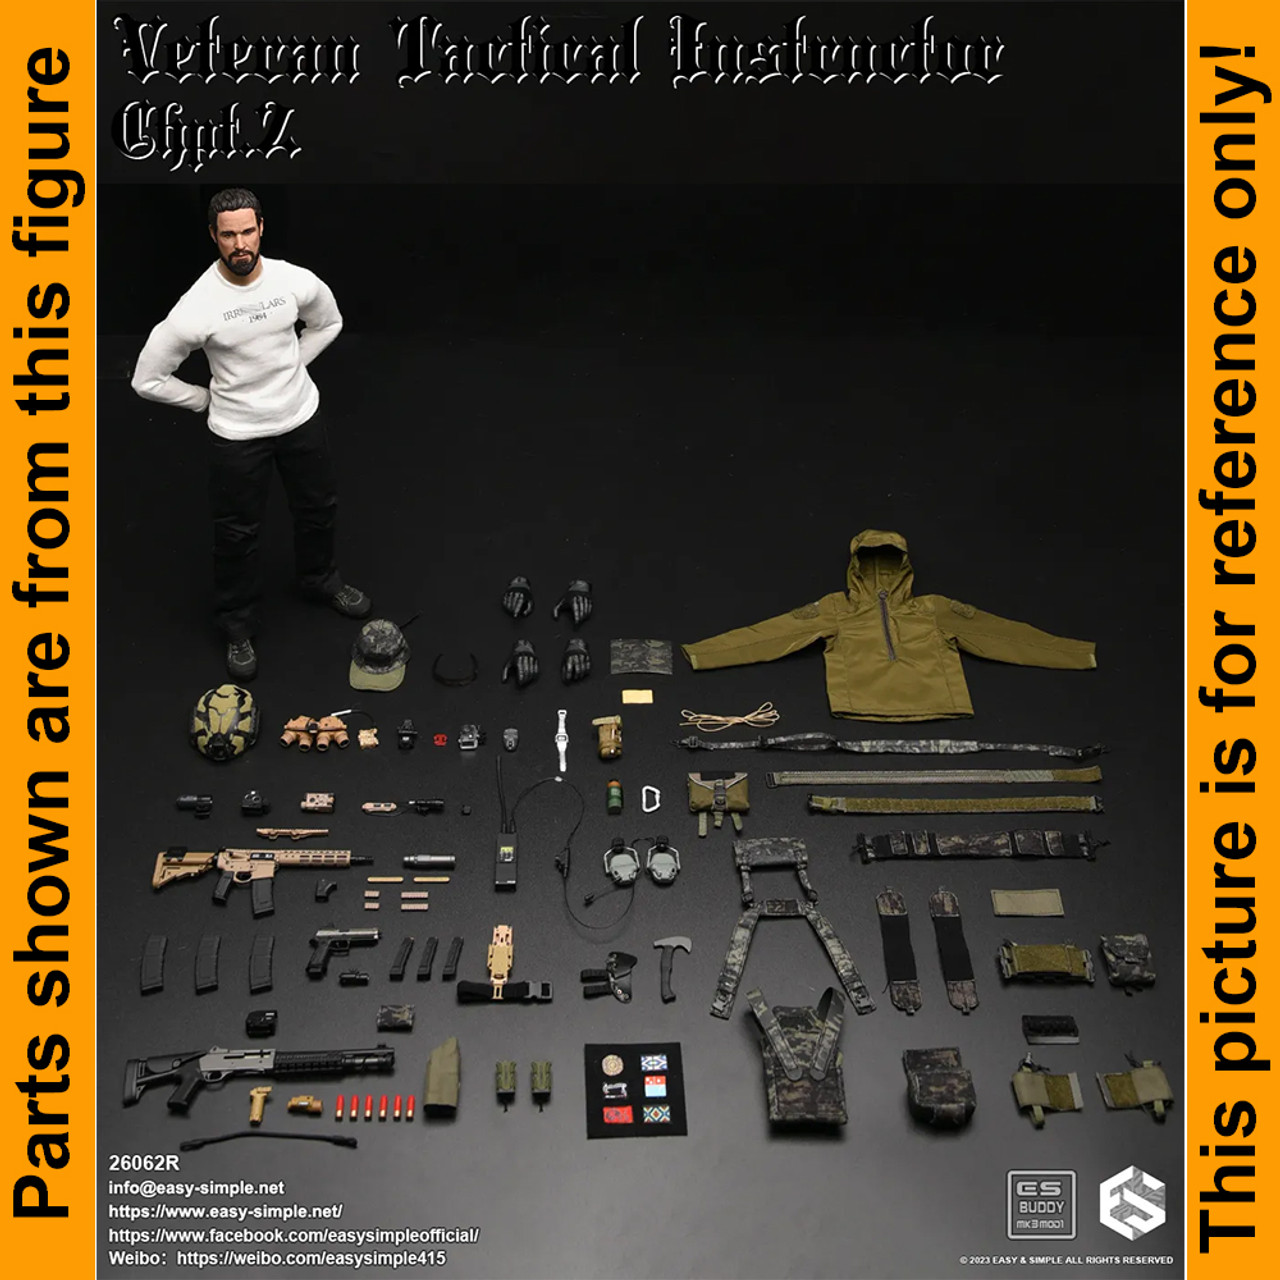 Tactical Instructor Chpt 2 - Black Pants - 1/6 Scale -